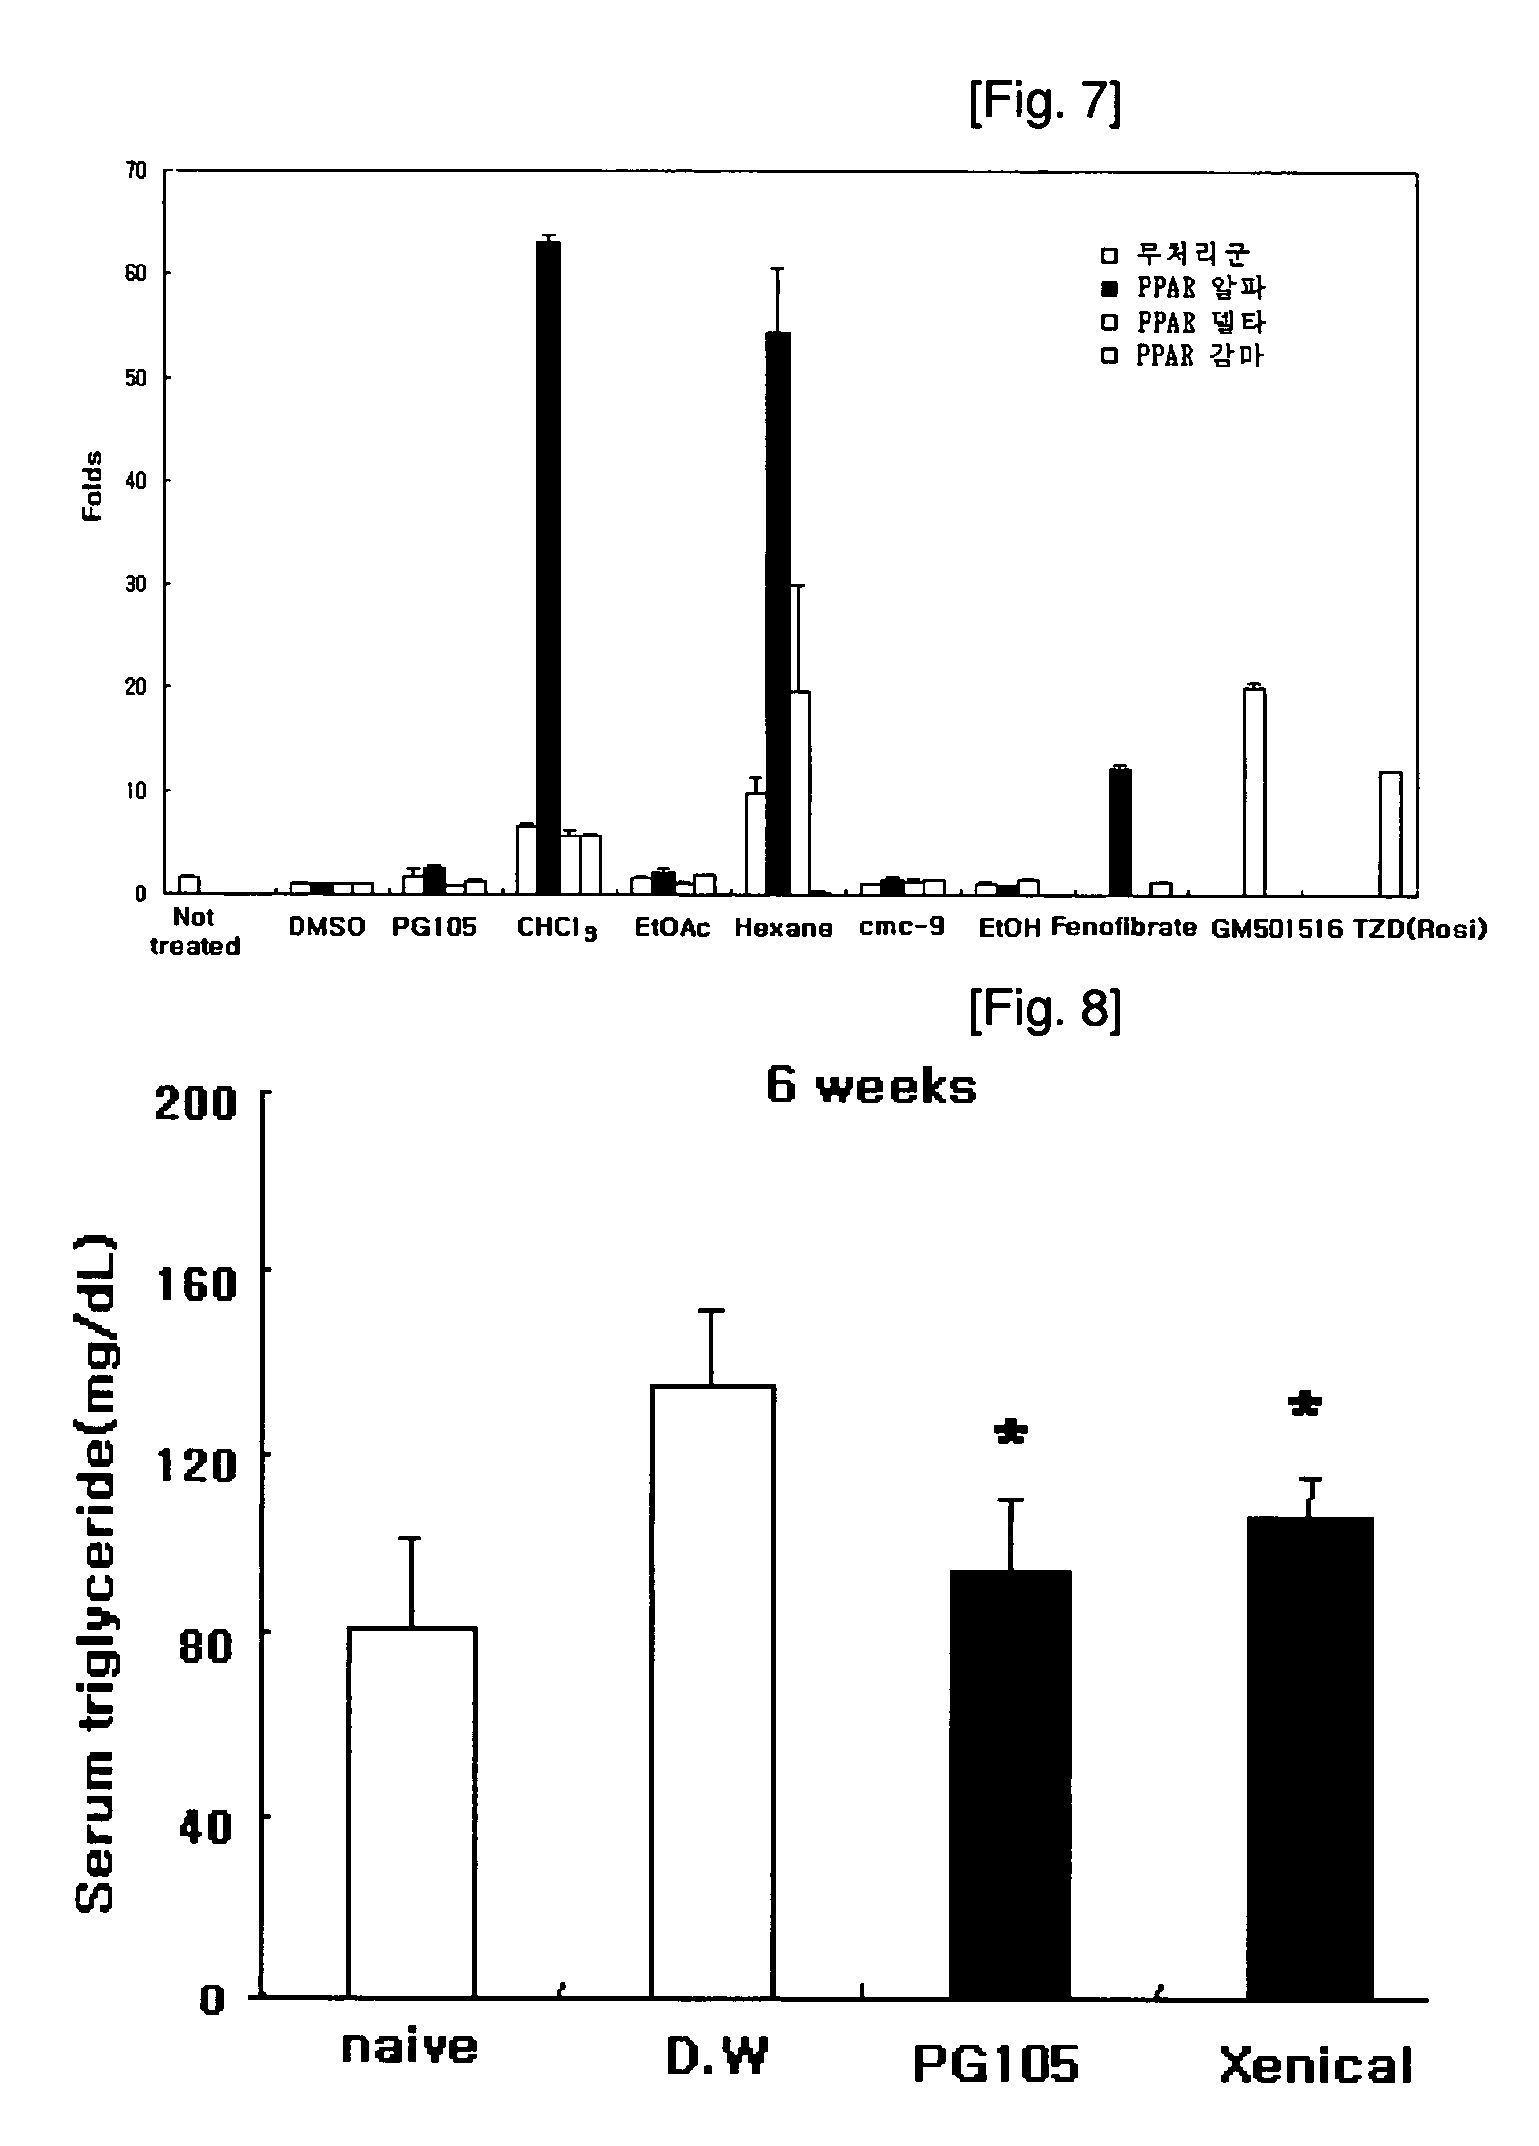 Composition comprising the alcohol compound isolated from the extract of cucurbitaceae family plant having anti-adipogenic and anti-obesity activity